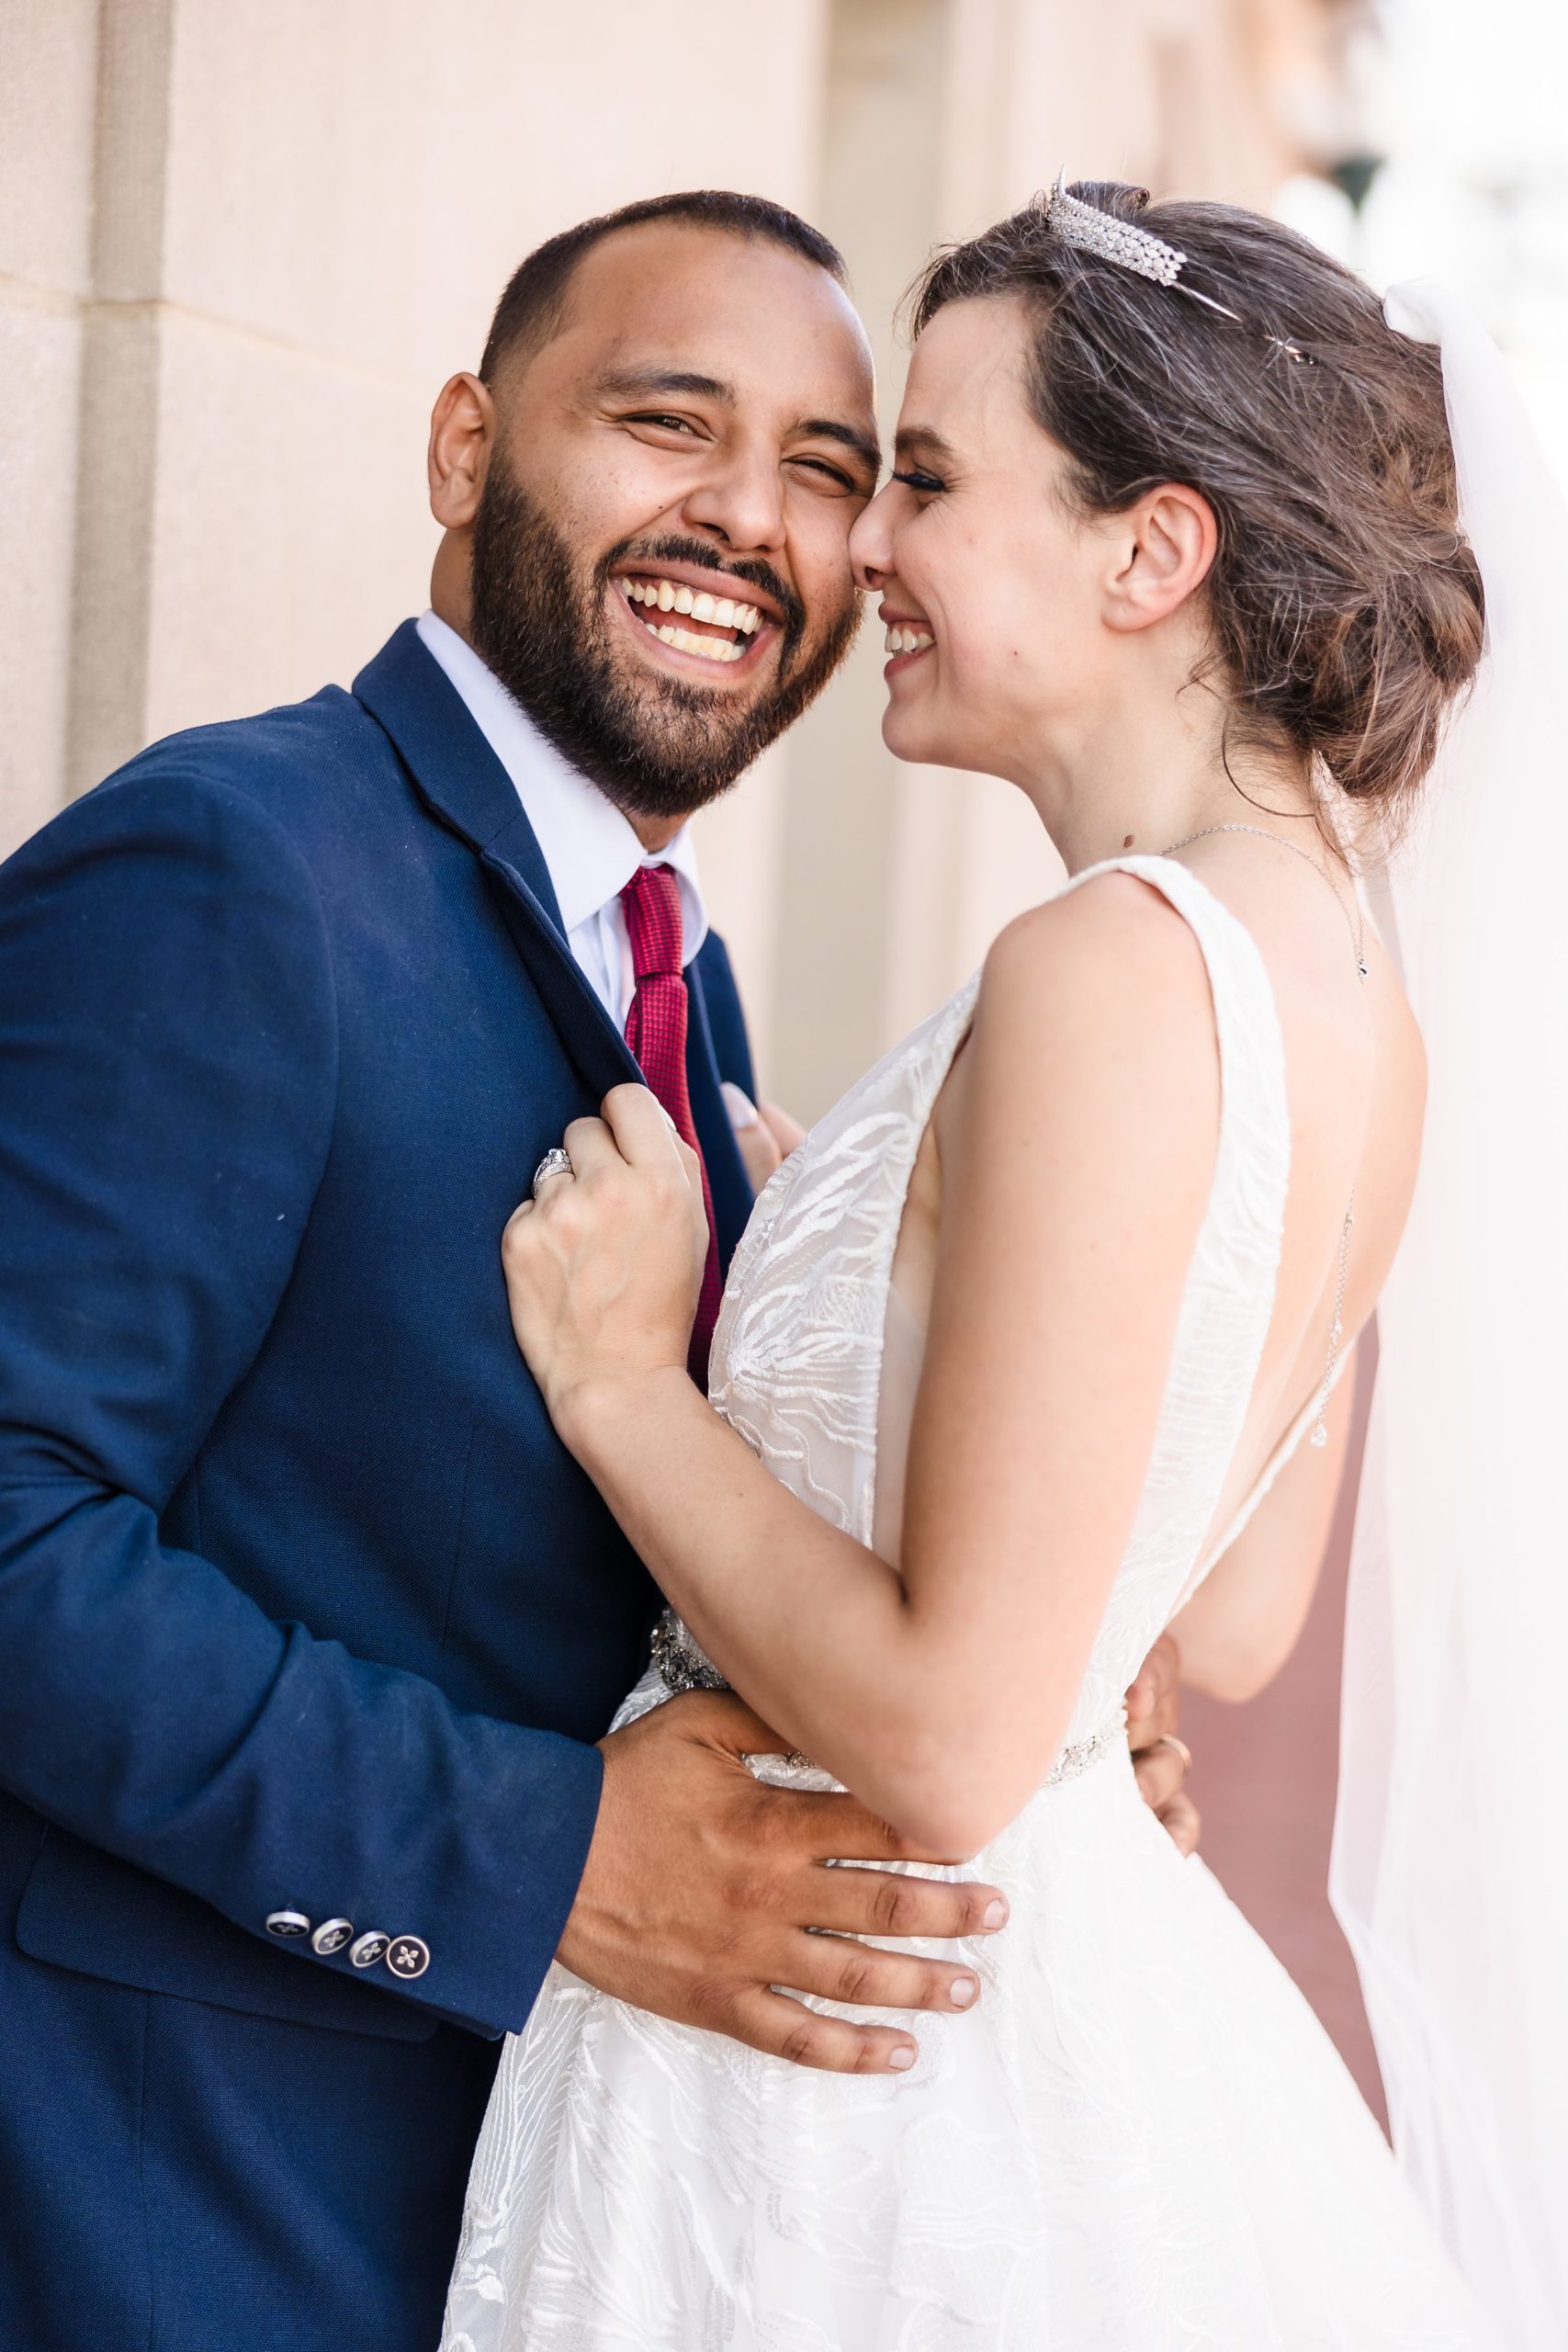 Couple embrace during their wedding at the Union Station in Joliet, Illinois.